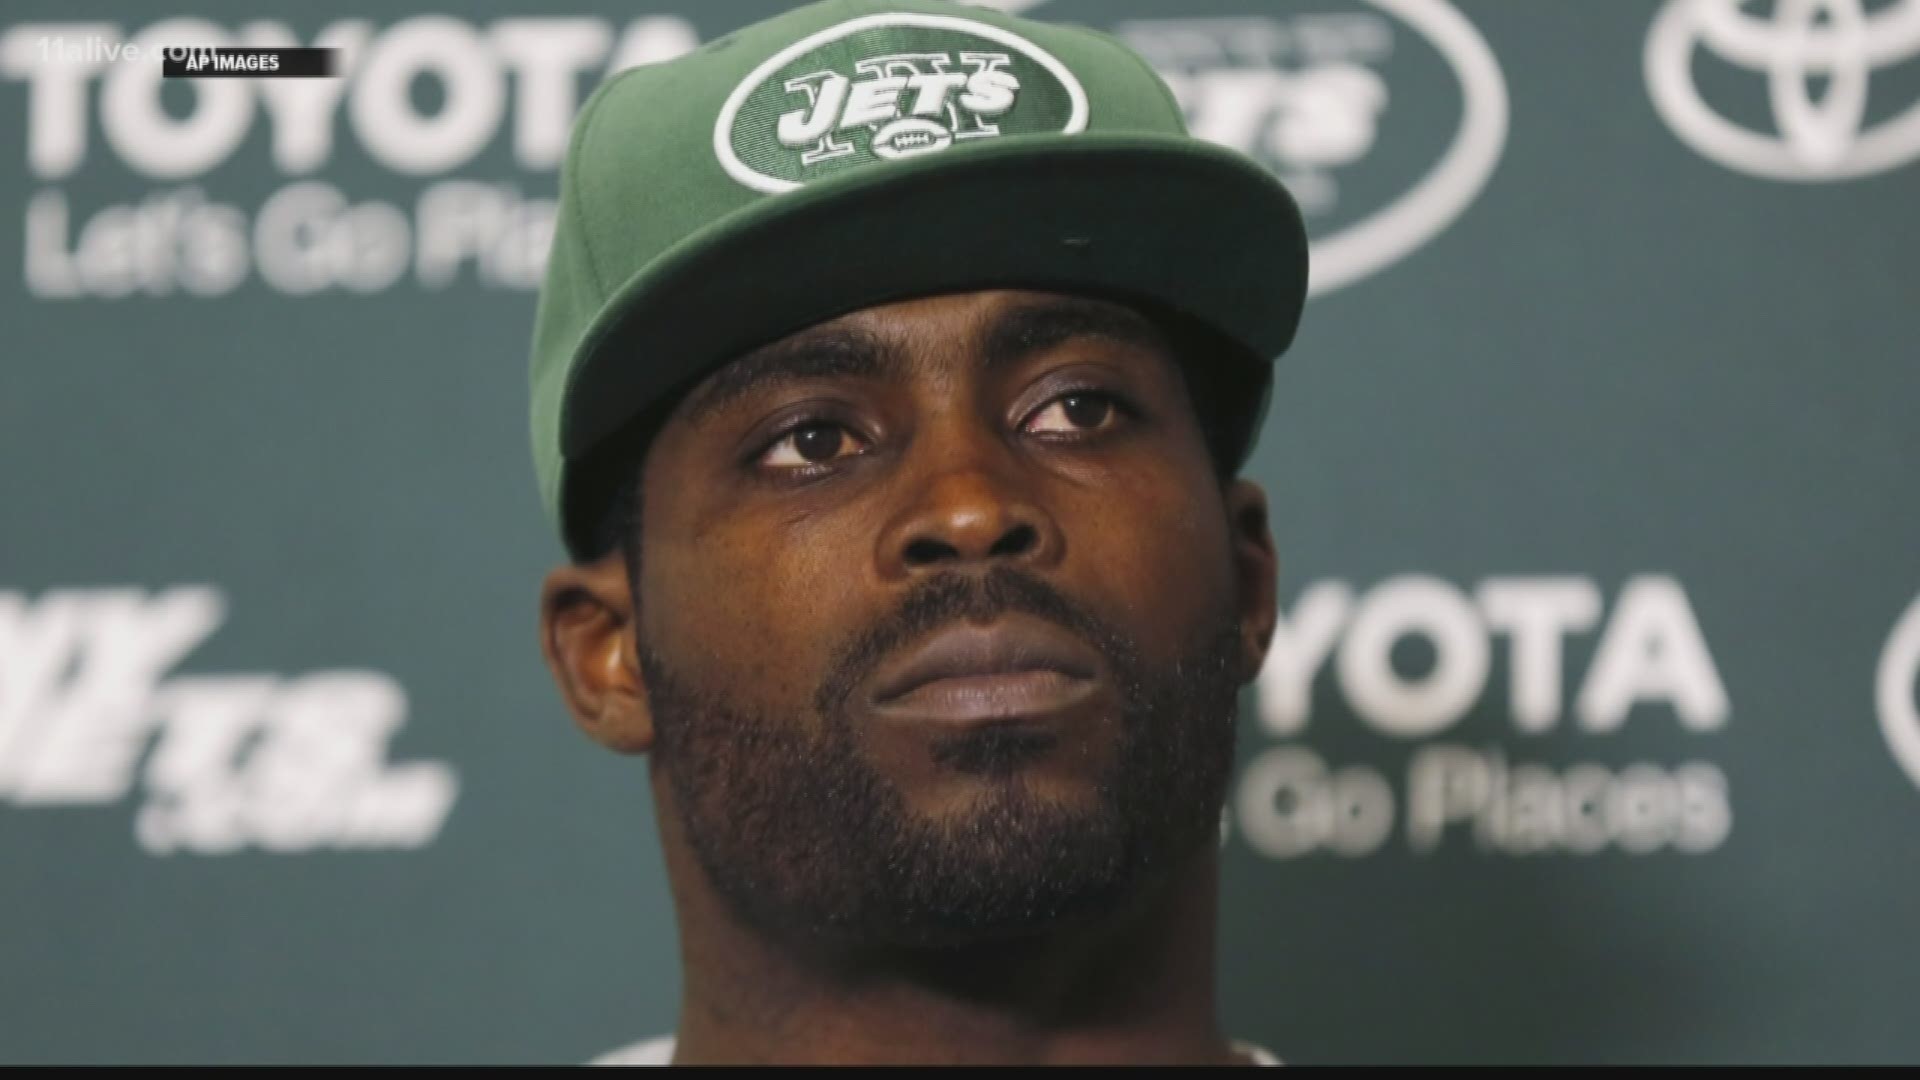 Backlash emerged when Vick was named an honorary captain, with animal advocates and others asking the NFL to change its decision over Vick's history with dogfighting